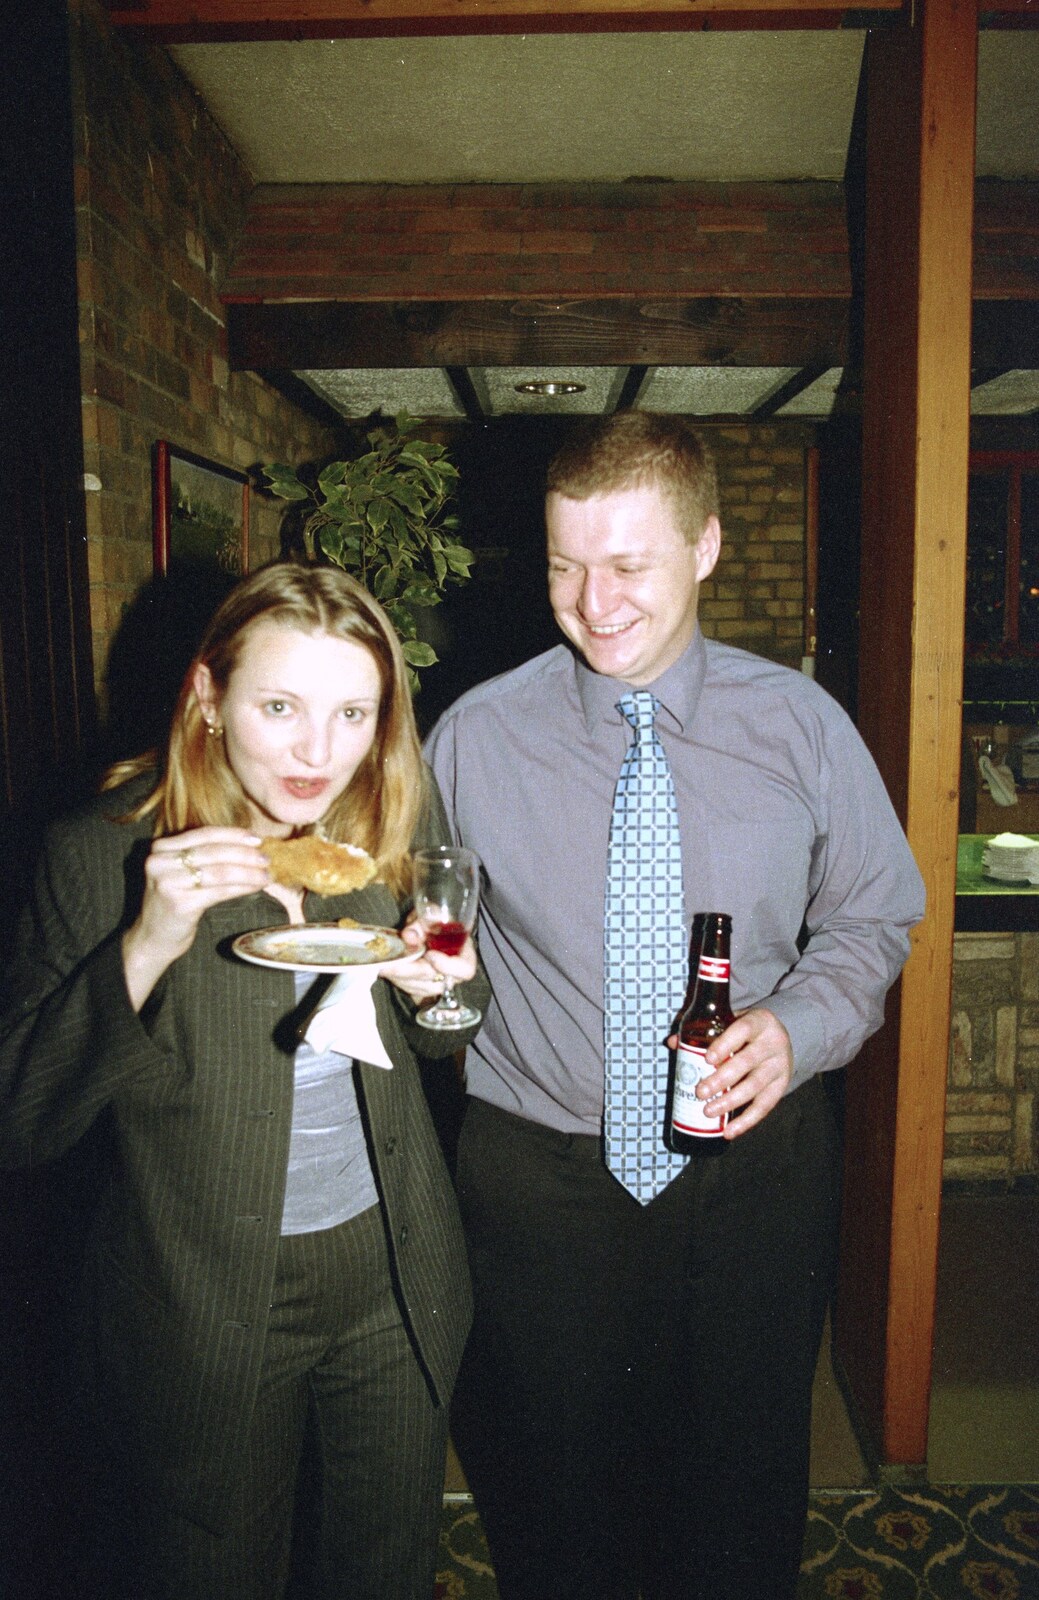 Adrian 'Dogs' and his girlfriend from Paula's 3G Lab Wedding Reception, Huntingdon, Cambridgeshire - 4th September 2000